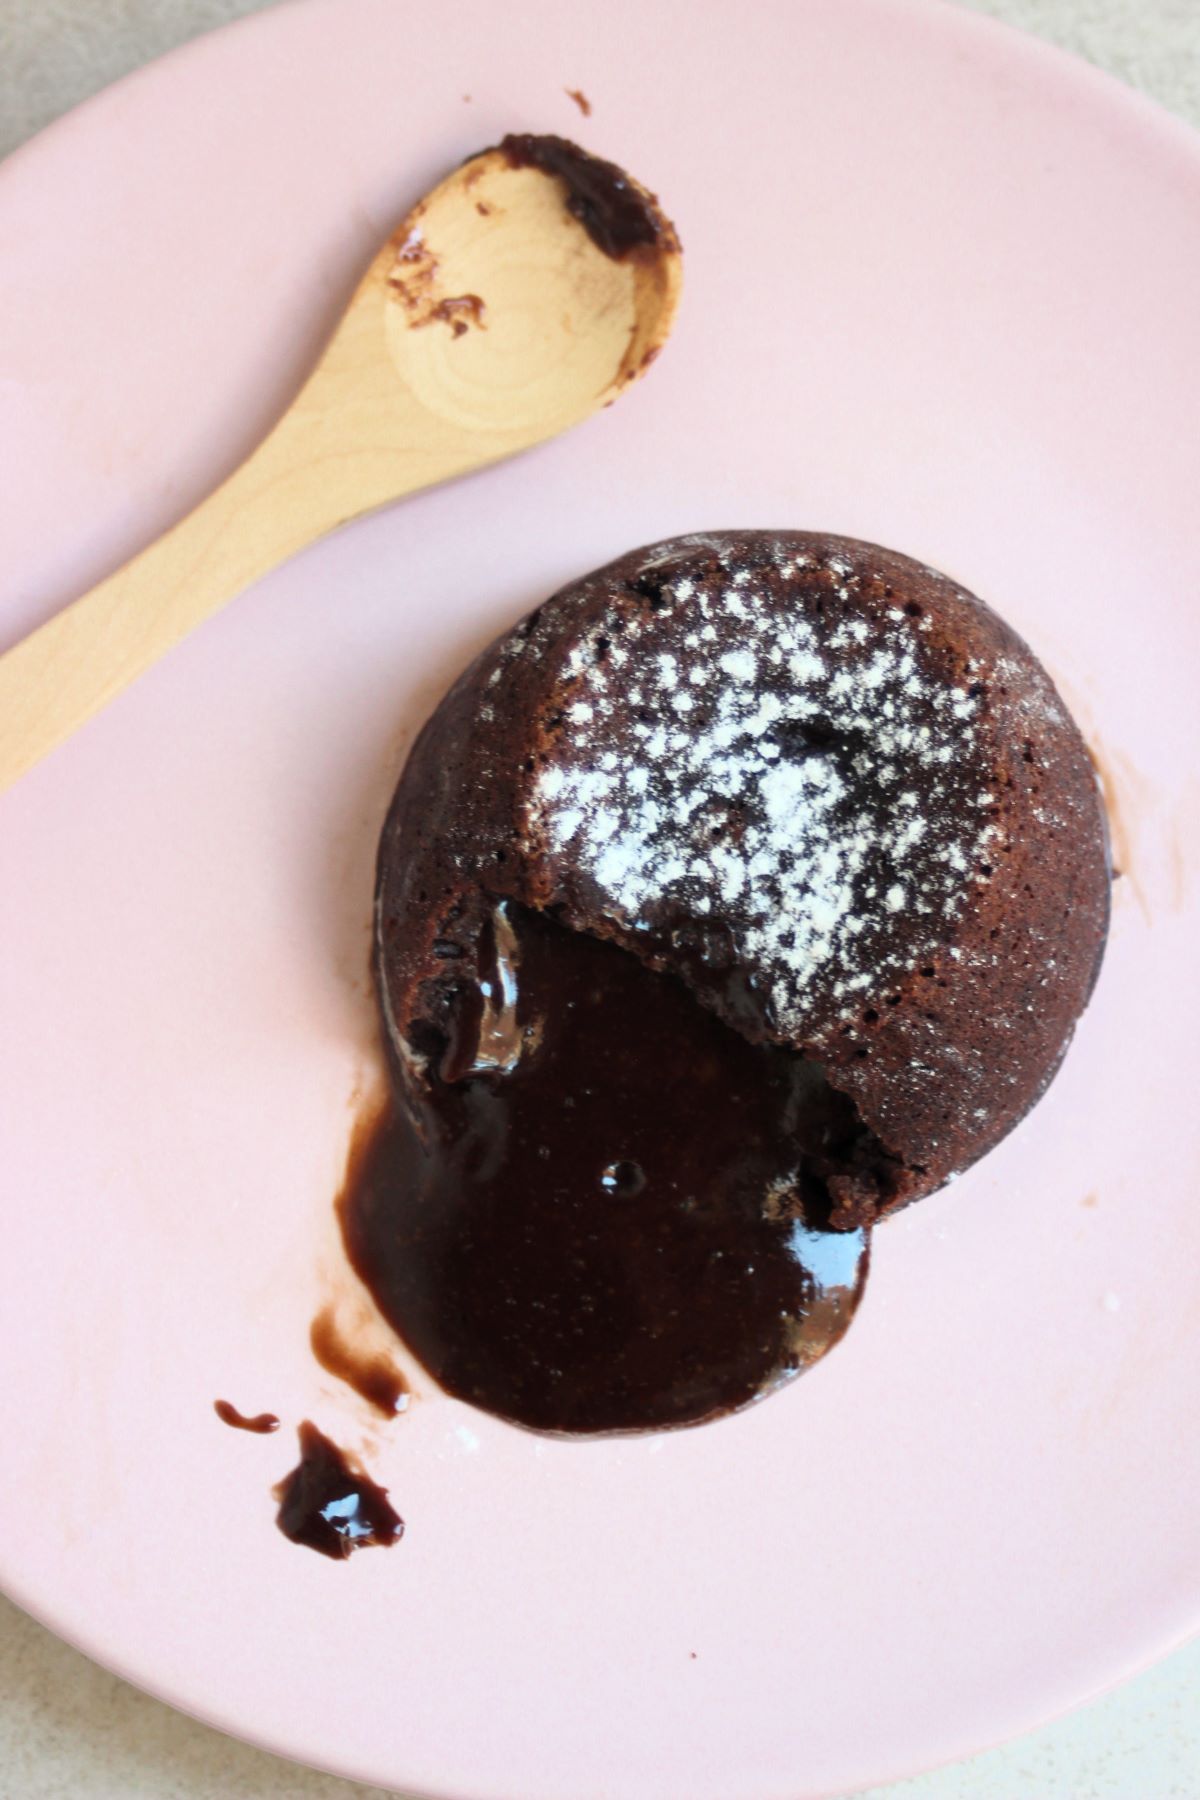 Molten lava cake, melted chocolate coming out of it, and a wooden spoon on a pink plate.